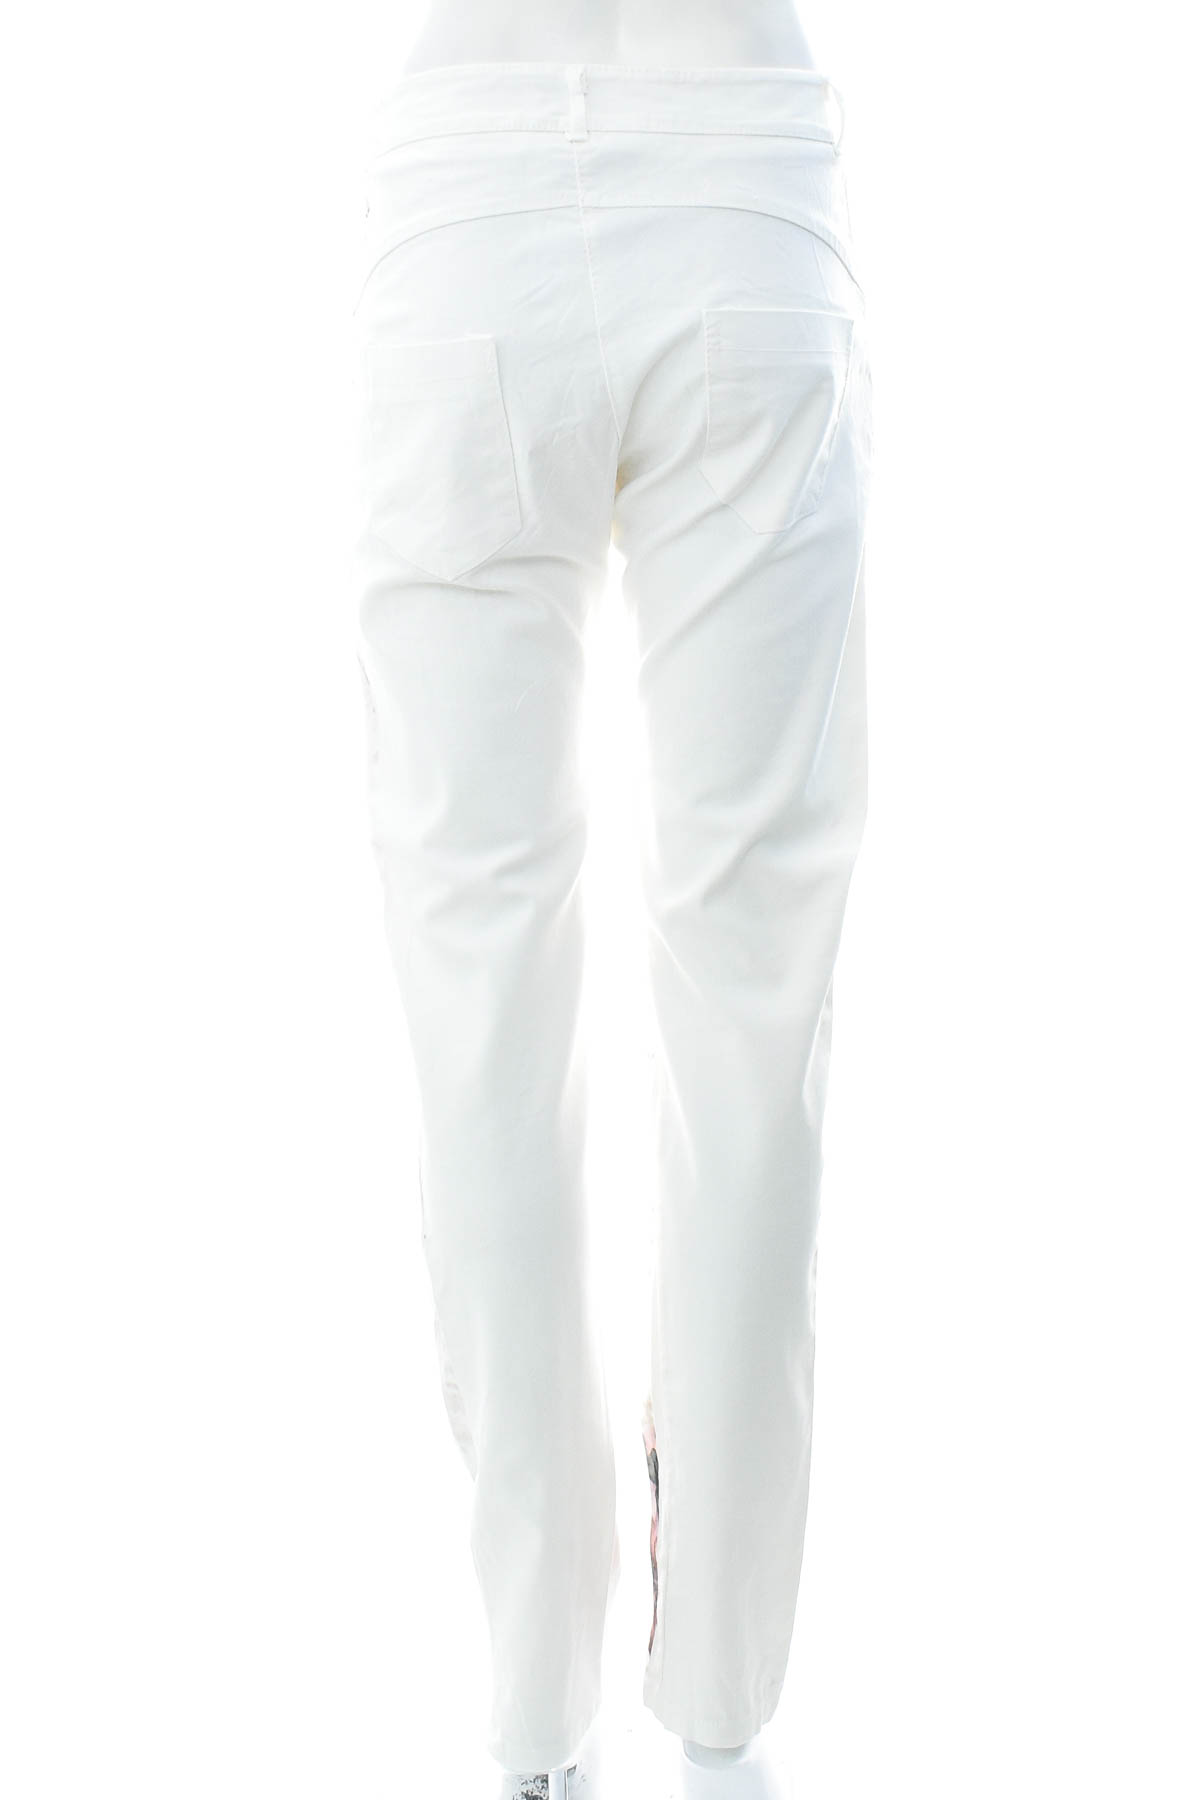 Women's trousers - Made in Italy - 1